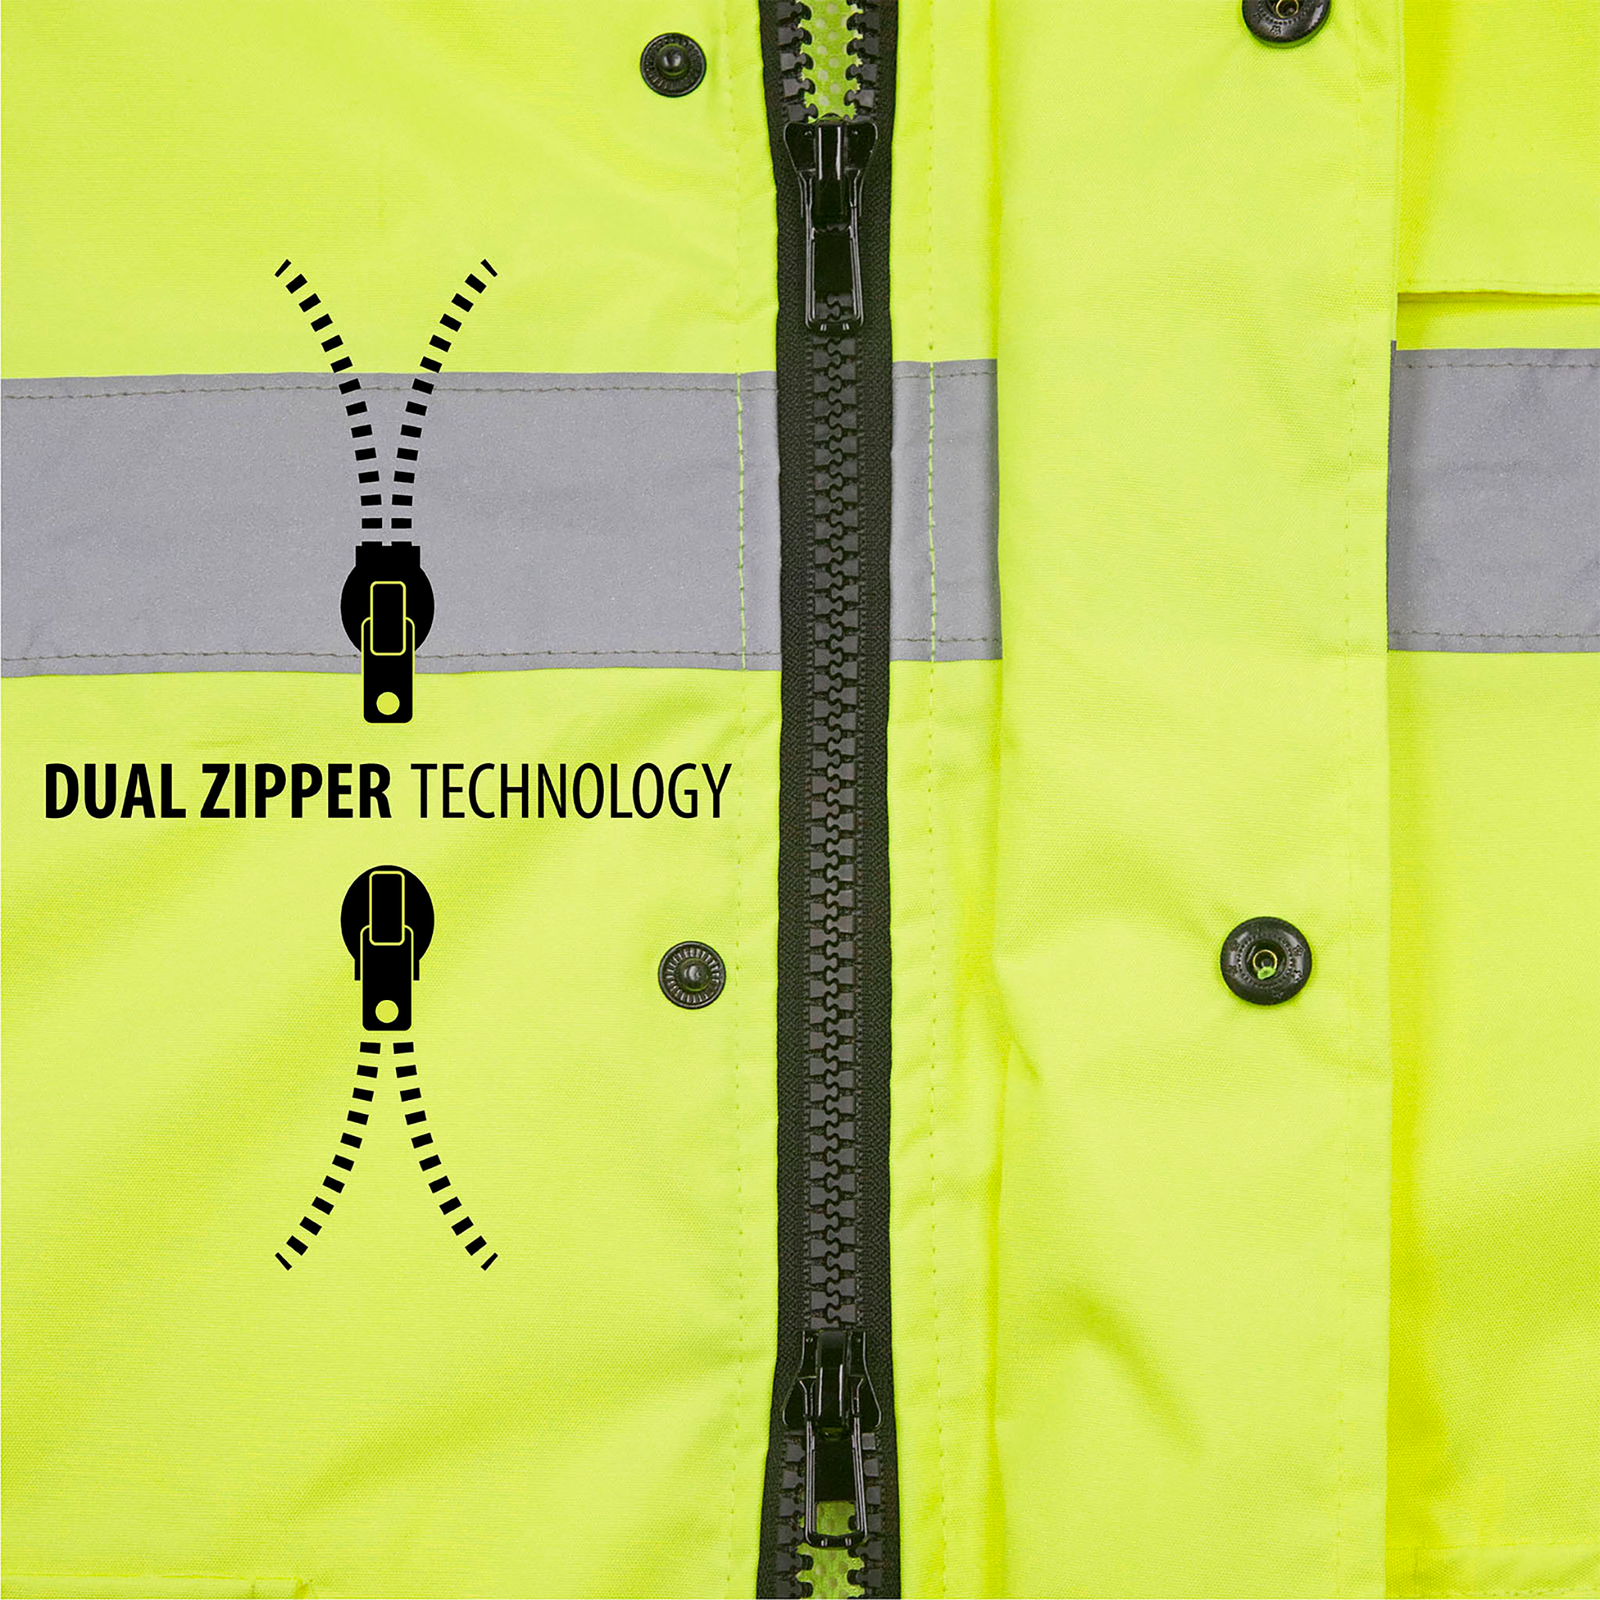 Heavy duty zipper with dual technology since it opens from the bottom up and from the top down.